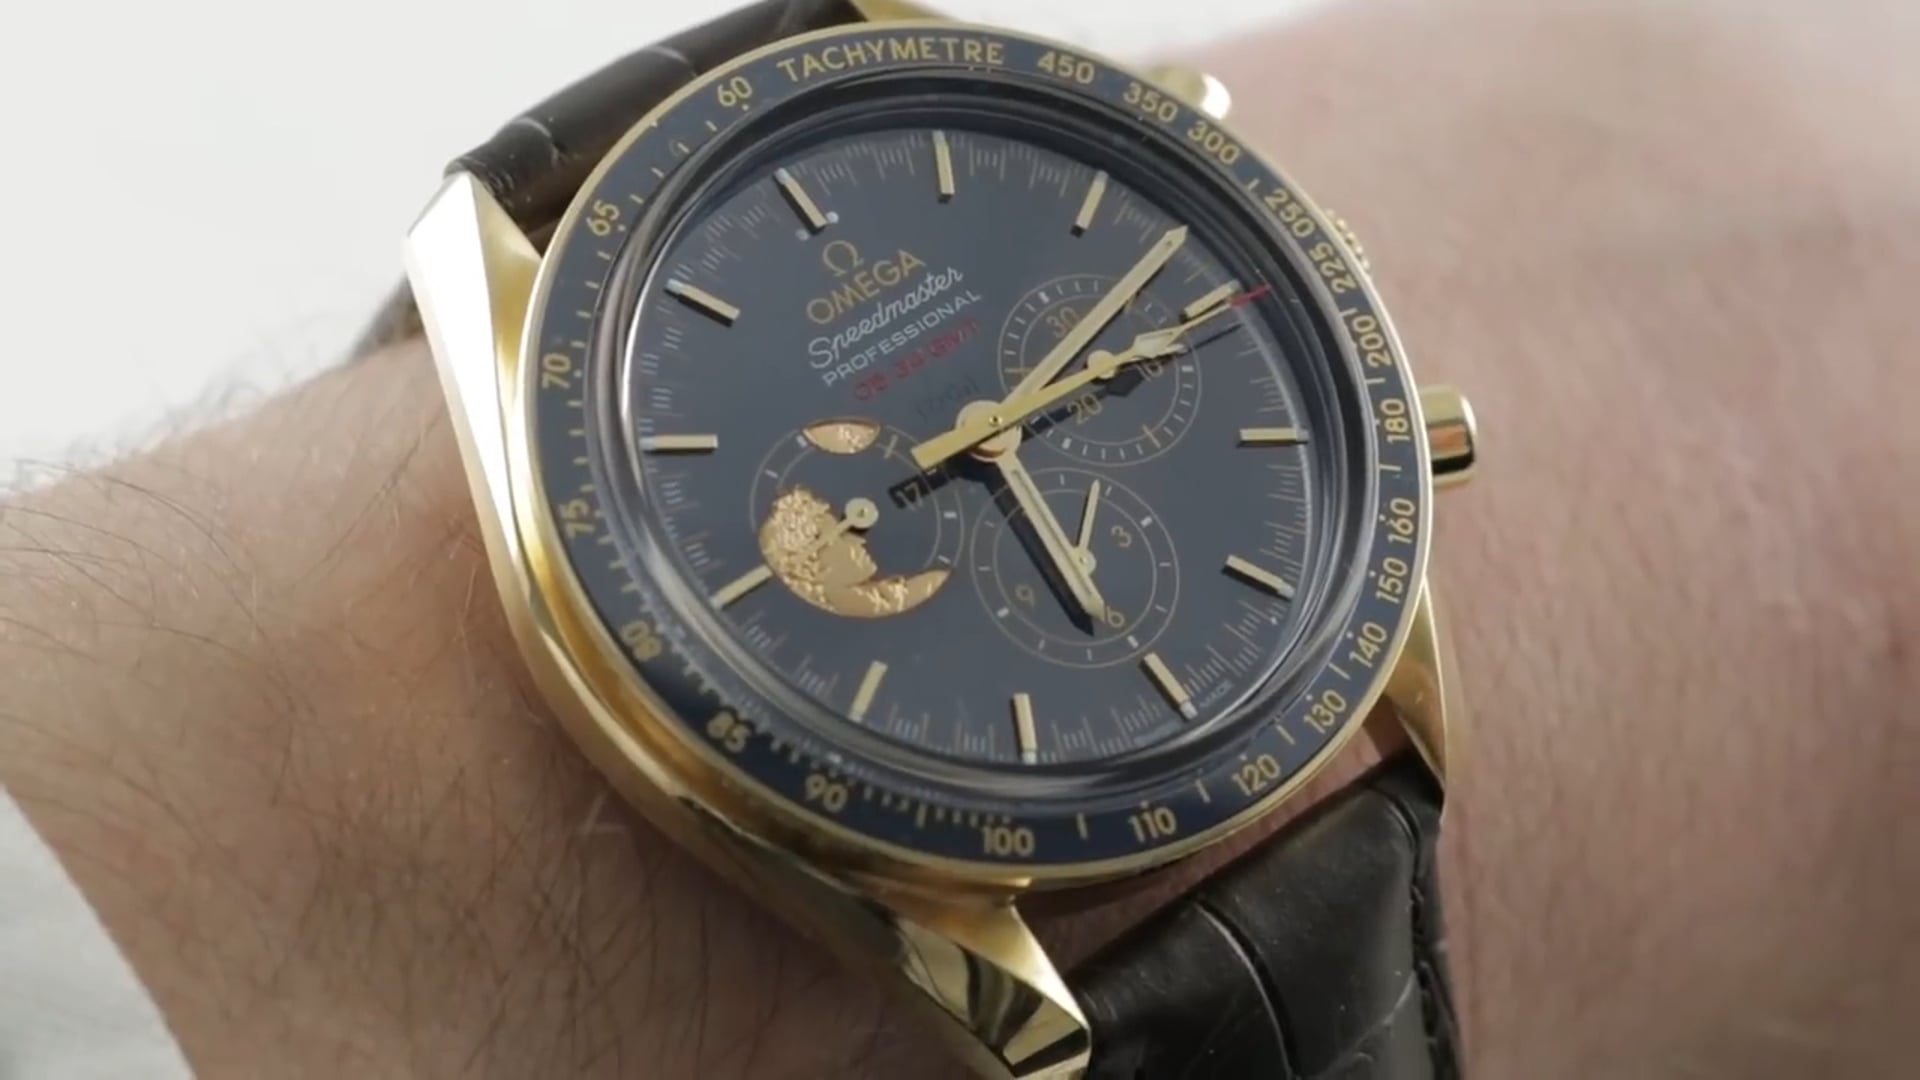 Omega Speedmaster Broad Arrow GMT Chronograph (3581.50.00) Review